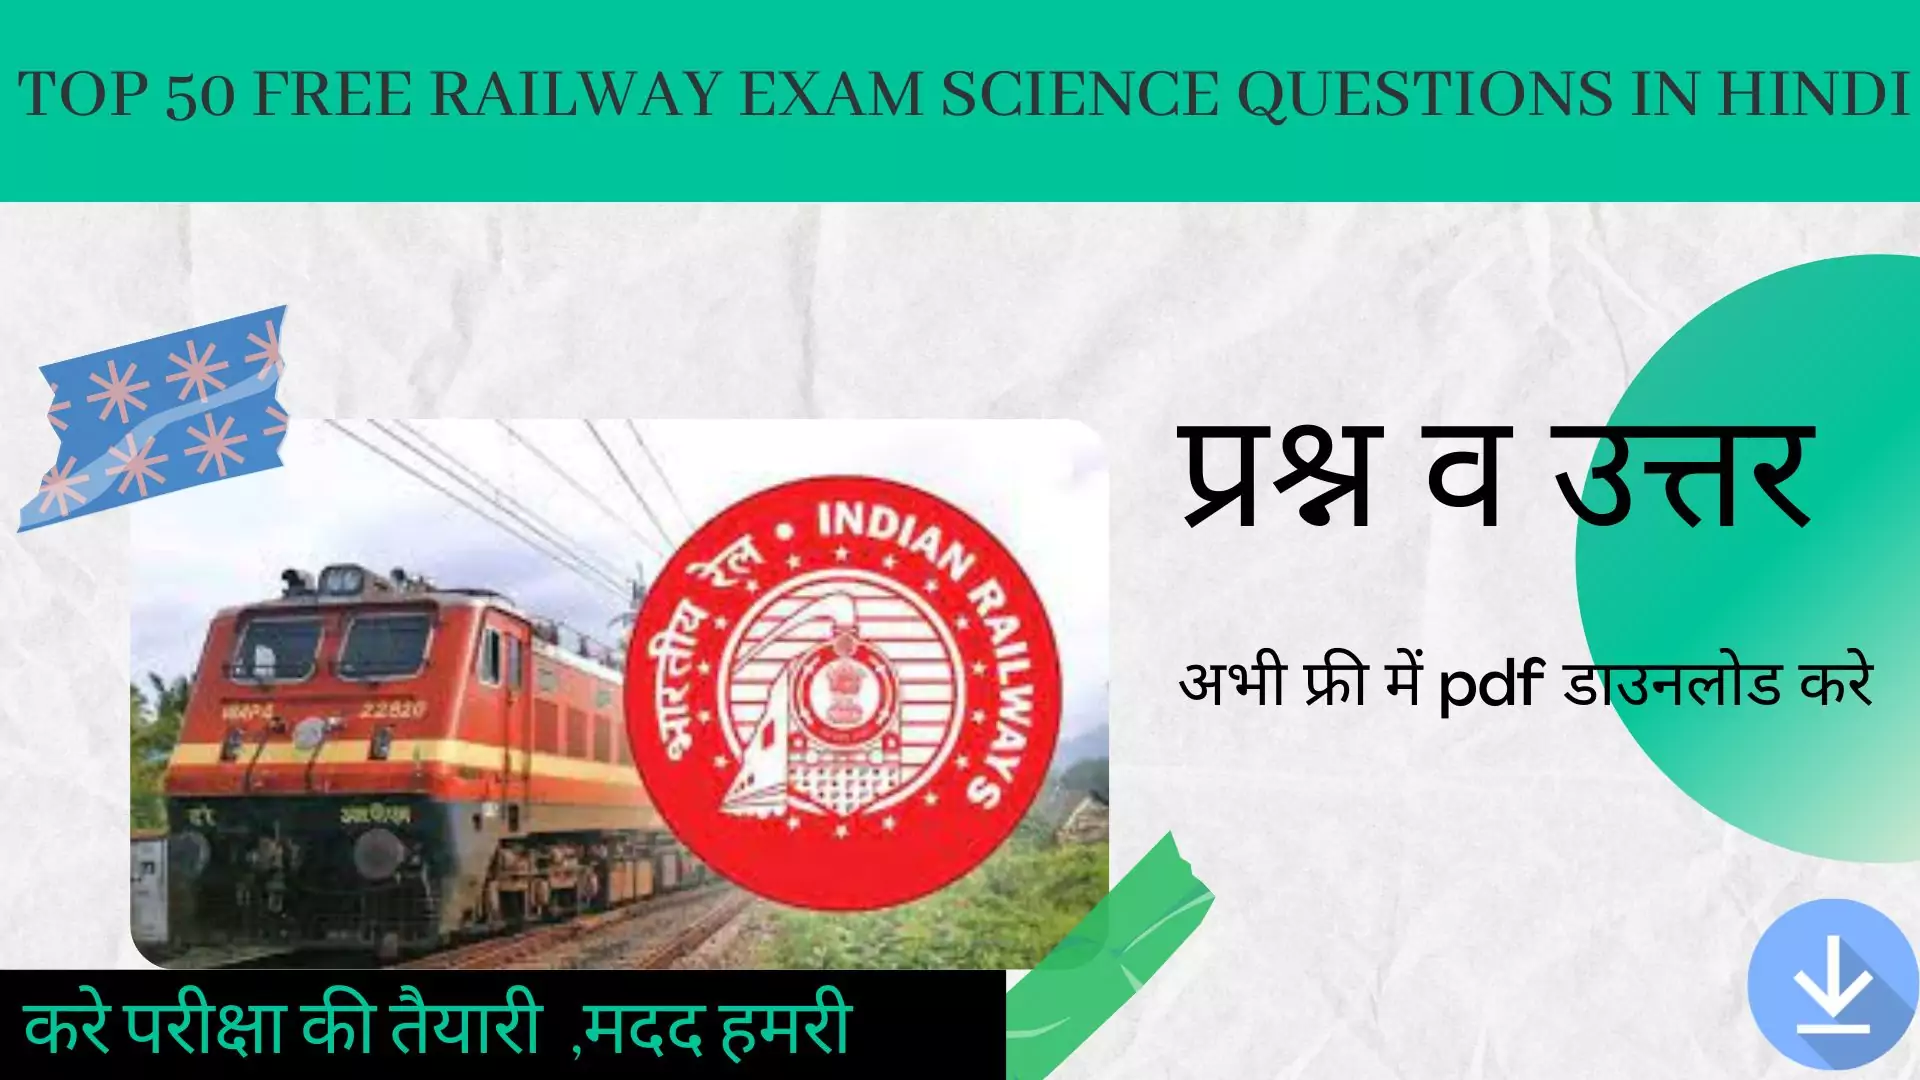 Top 50 Free railway Exam science questions in hindi,railway exam sceince in 2022